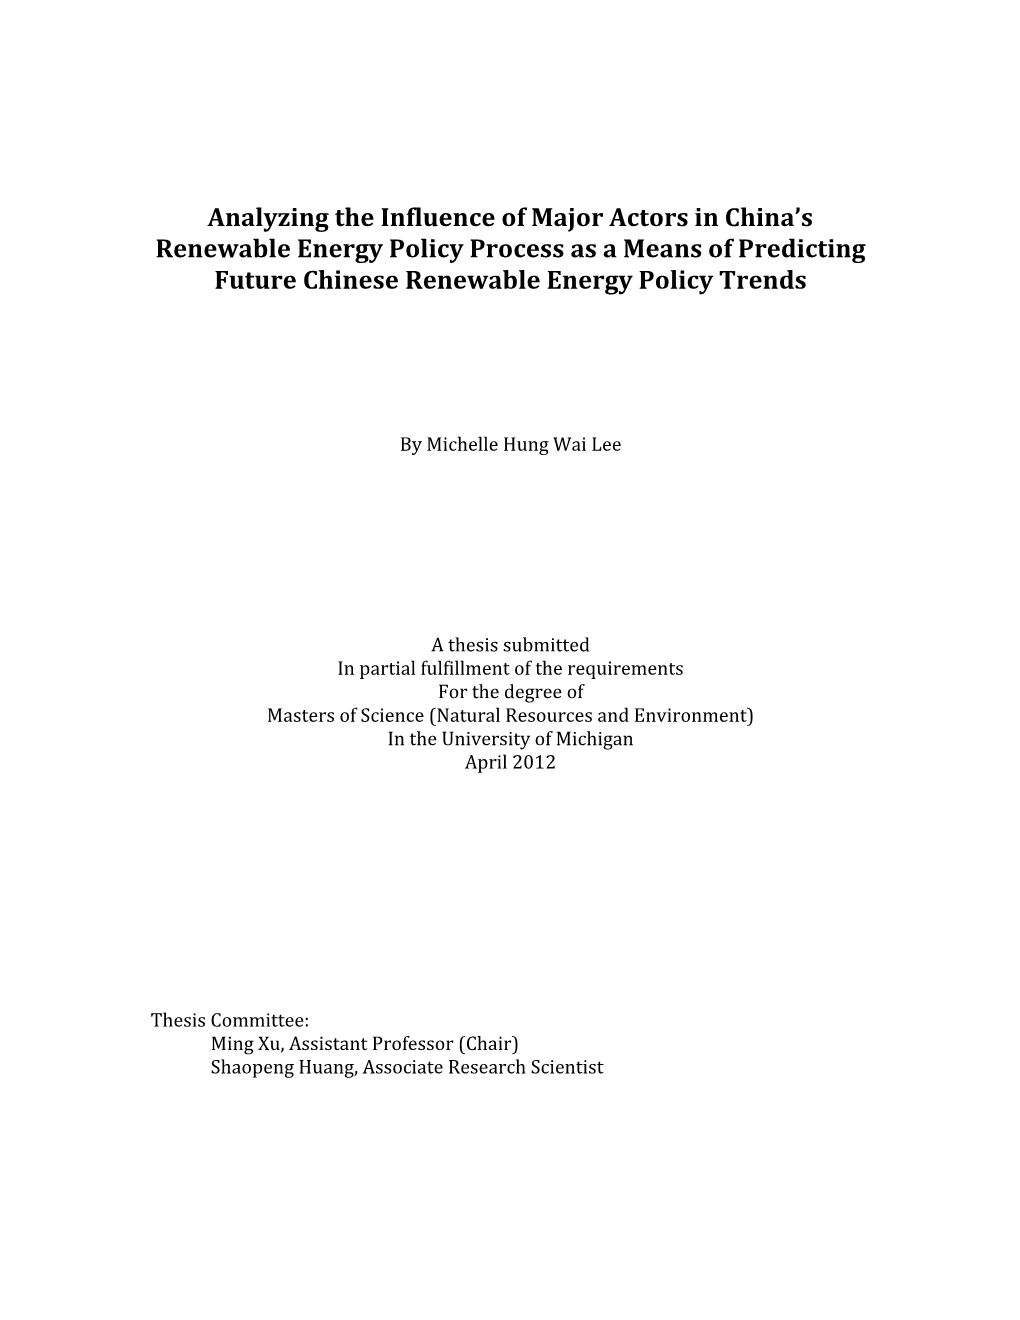 Analyzing the Influence of Major Actors in China's Renewable